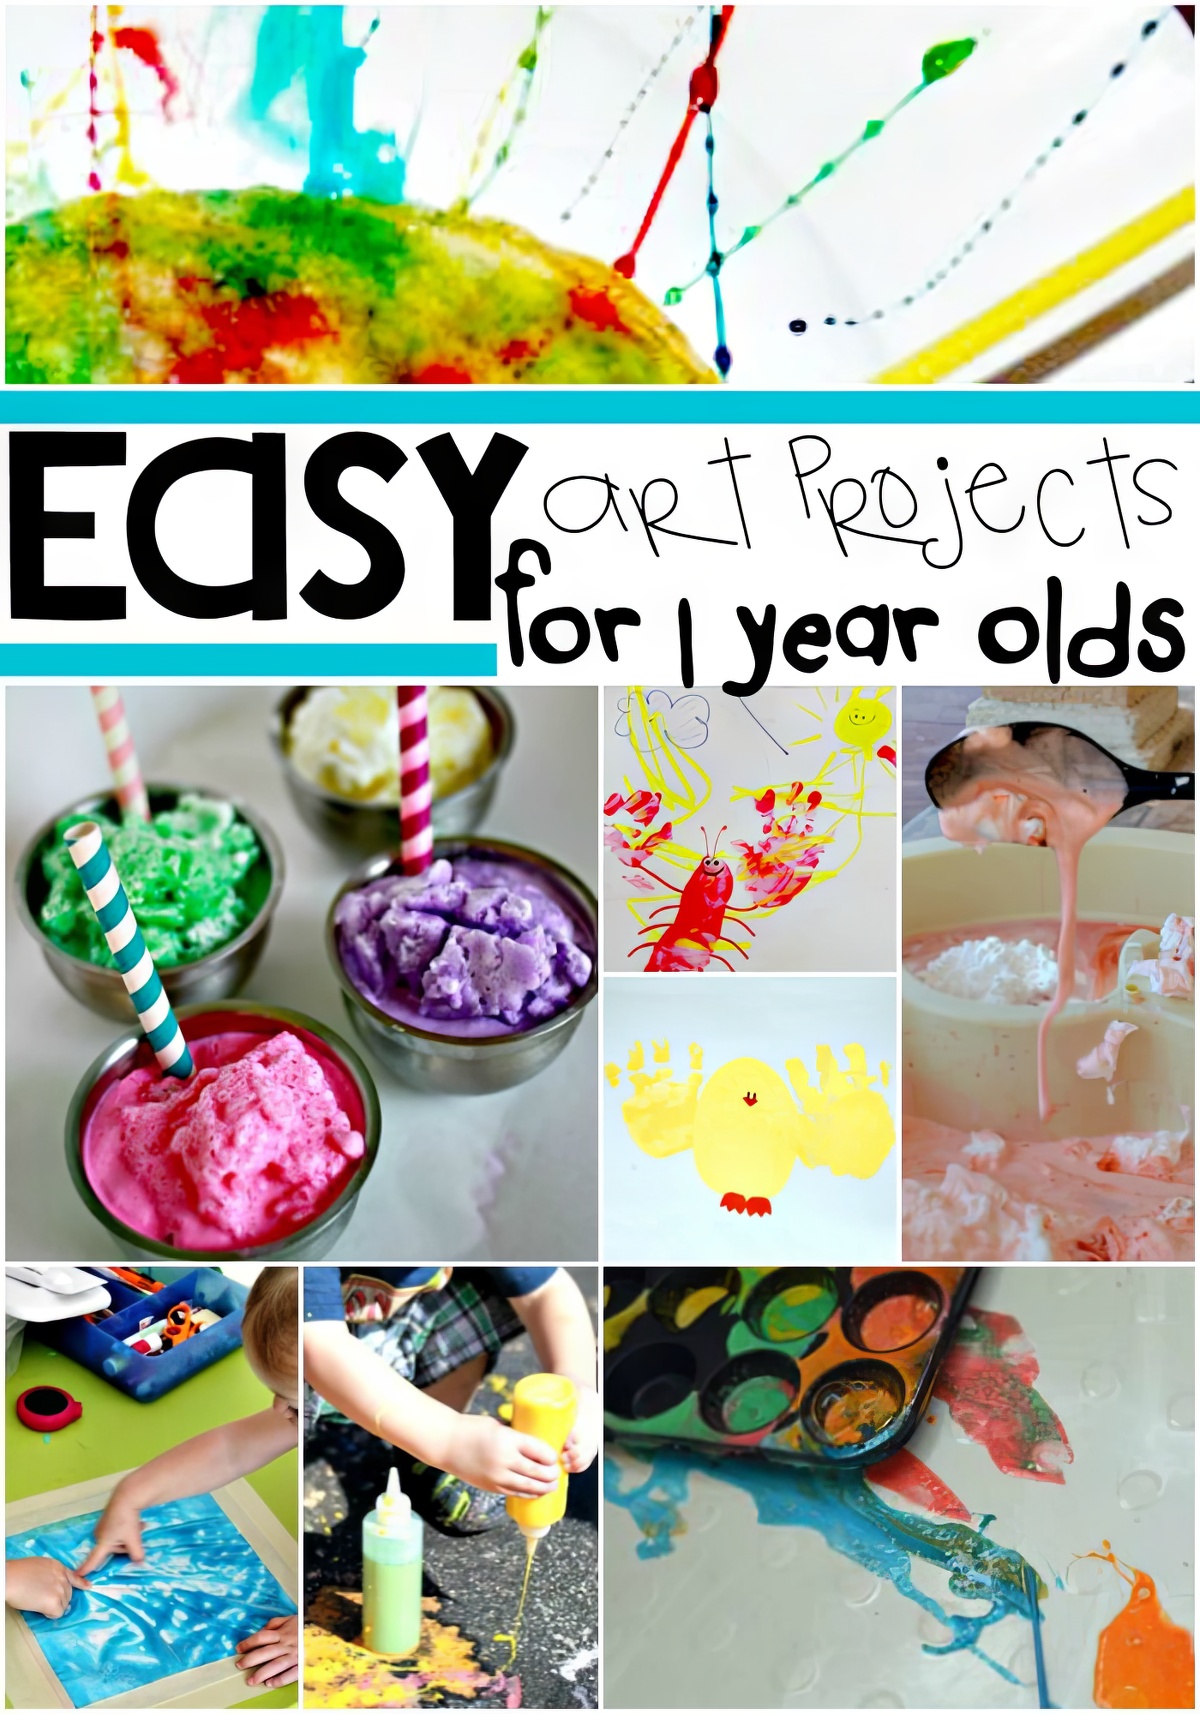 Have fun creating these Easy Art Projects for Your 1 Year Olds!